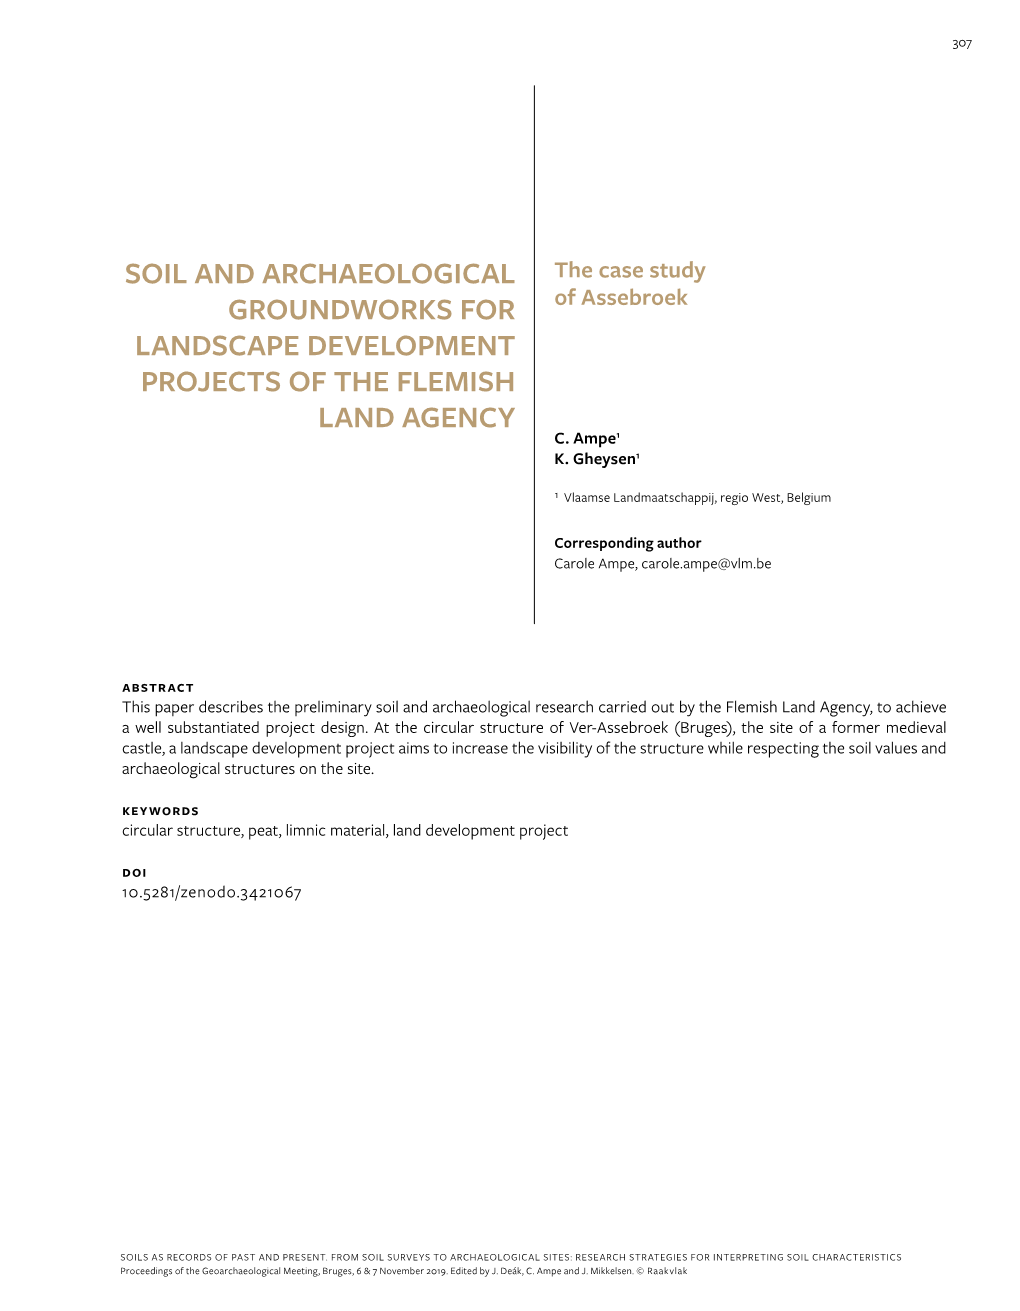 Soil and Archaeological Groundworks for Landscape Development Projects of the Flemish Land Agency 309